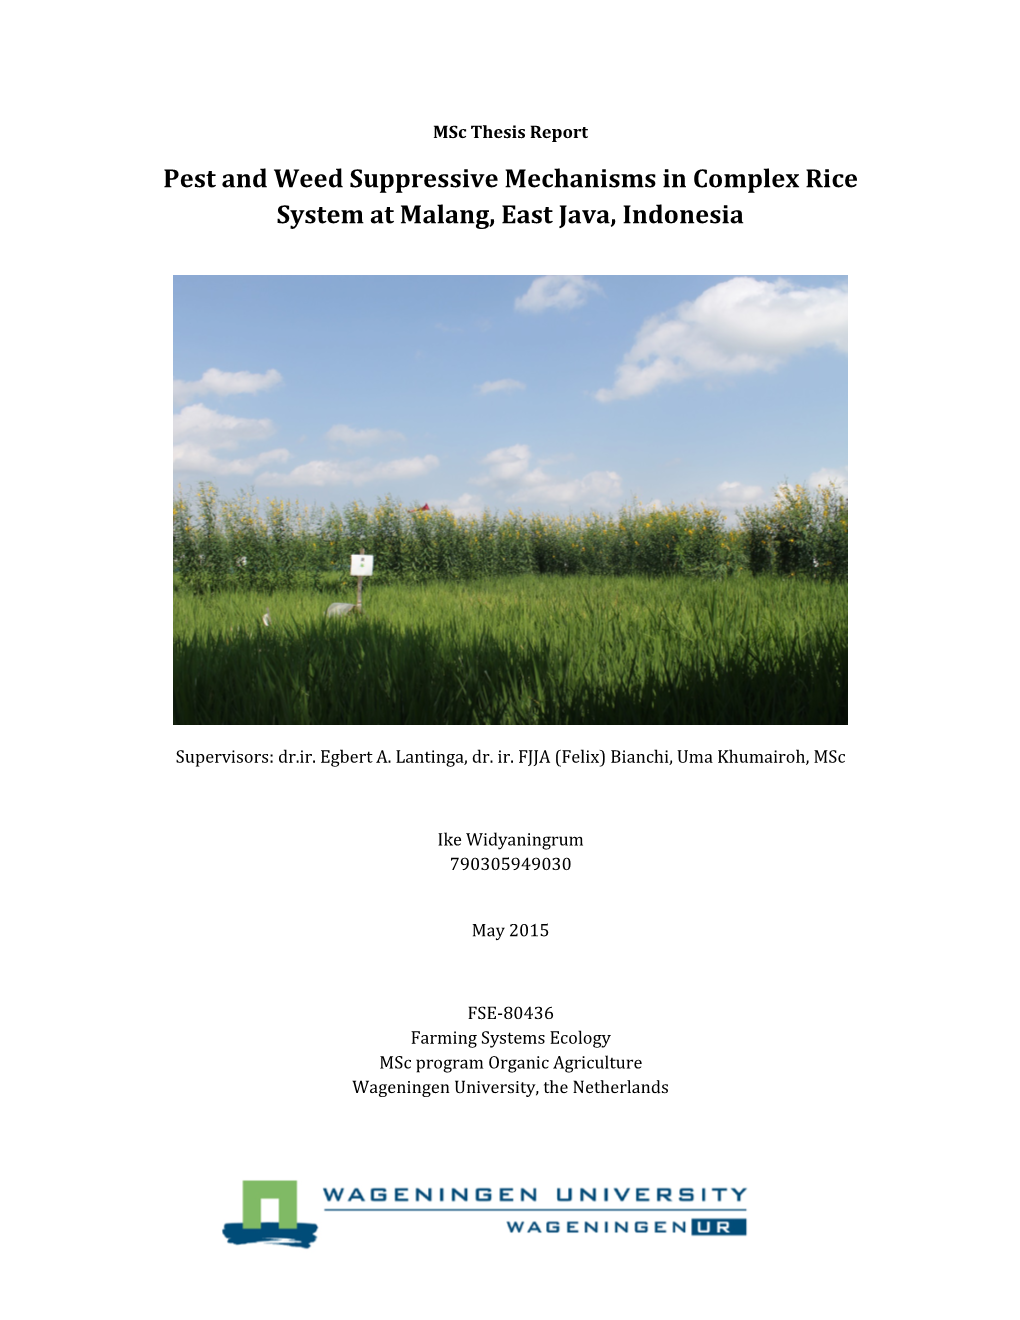 Pest and Weed Suppressive Mechanisms in Complex Rice System at Malang, East Java, Indonesia